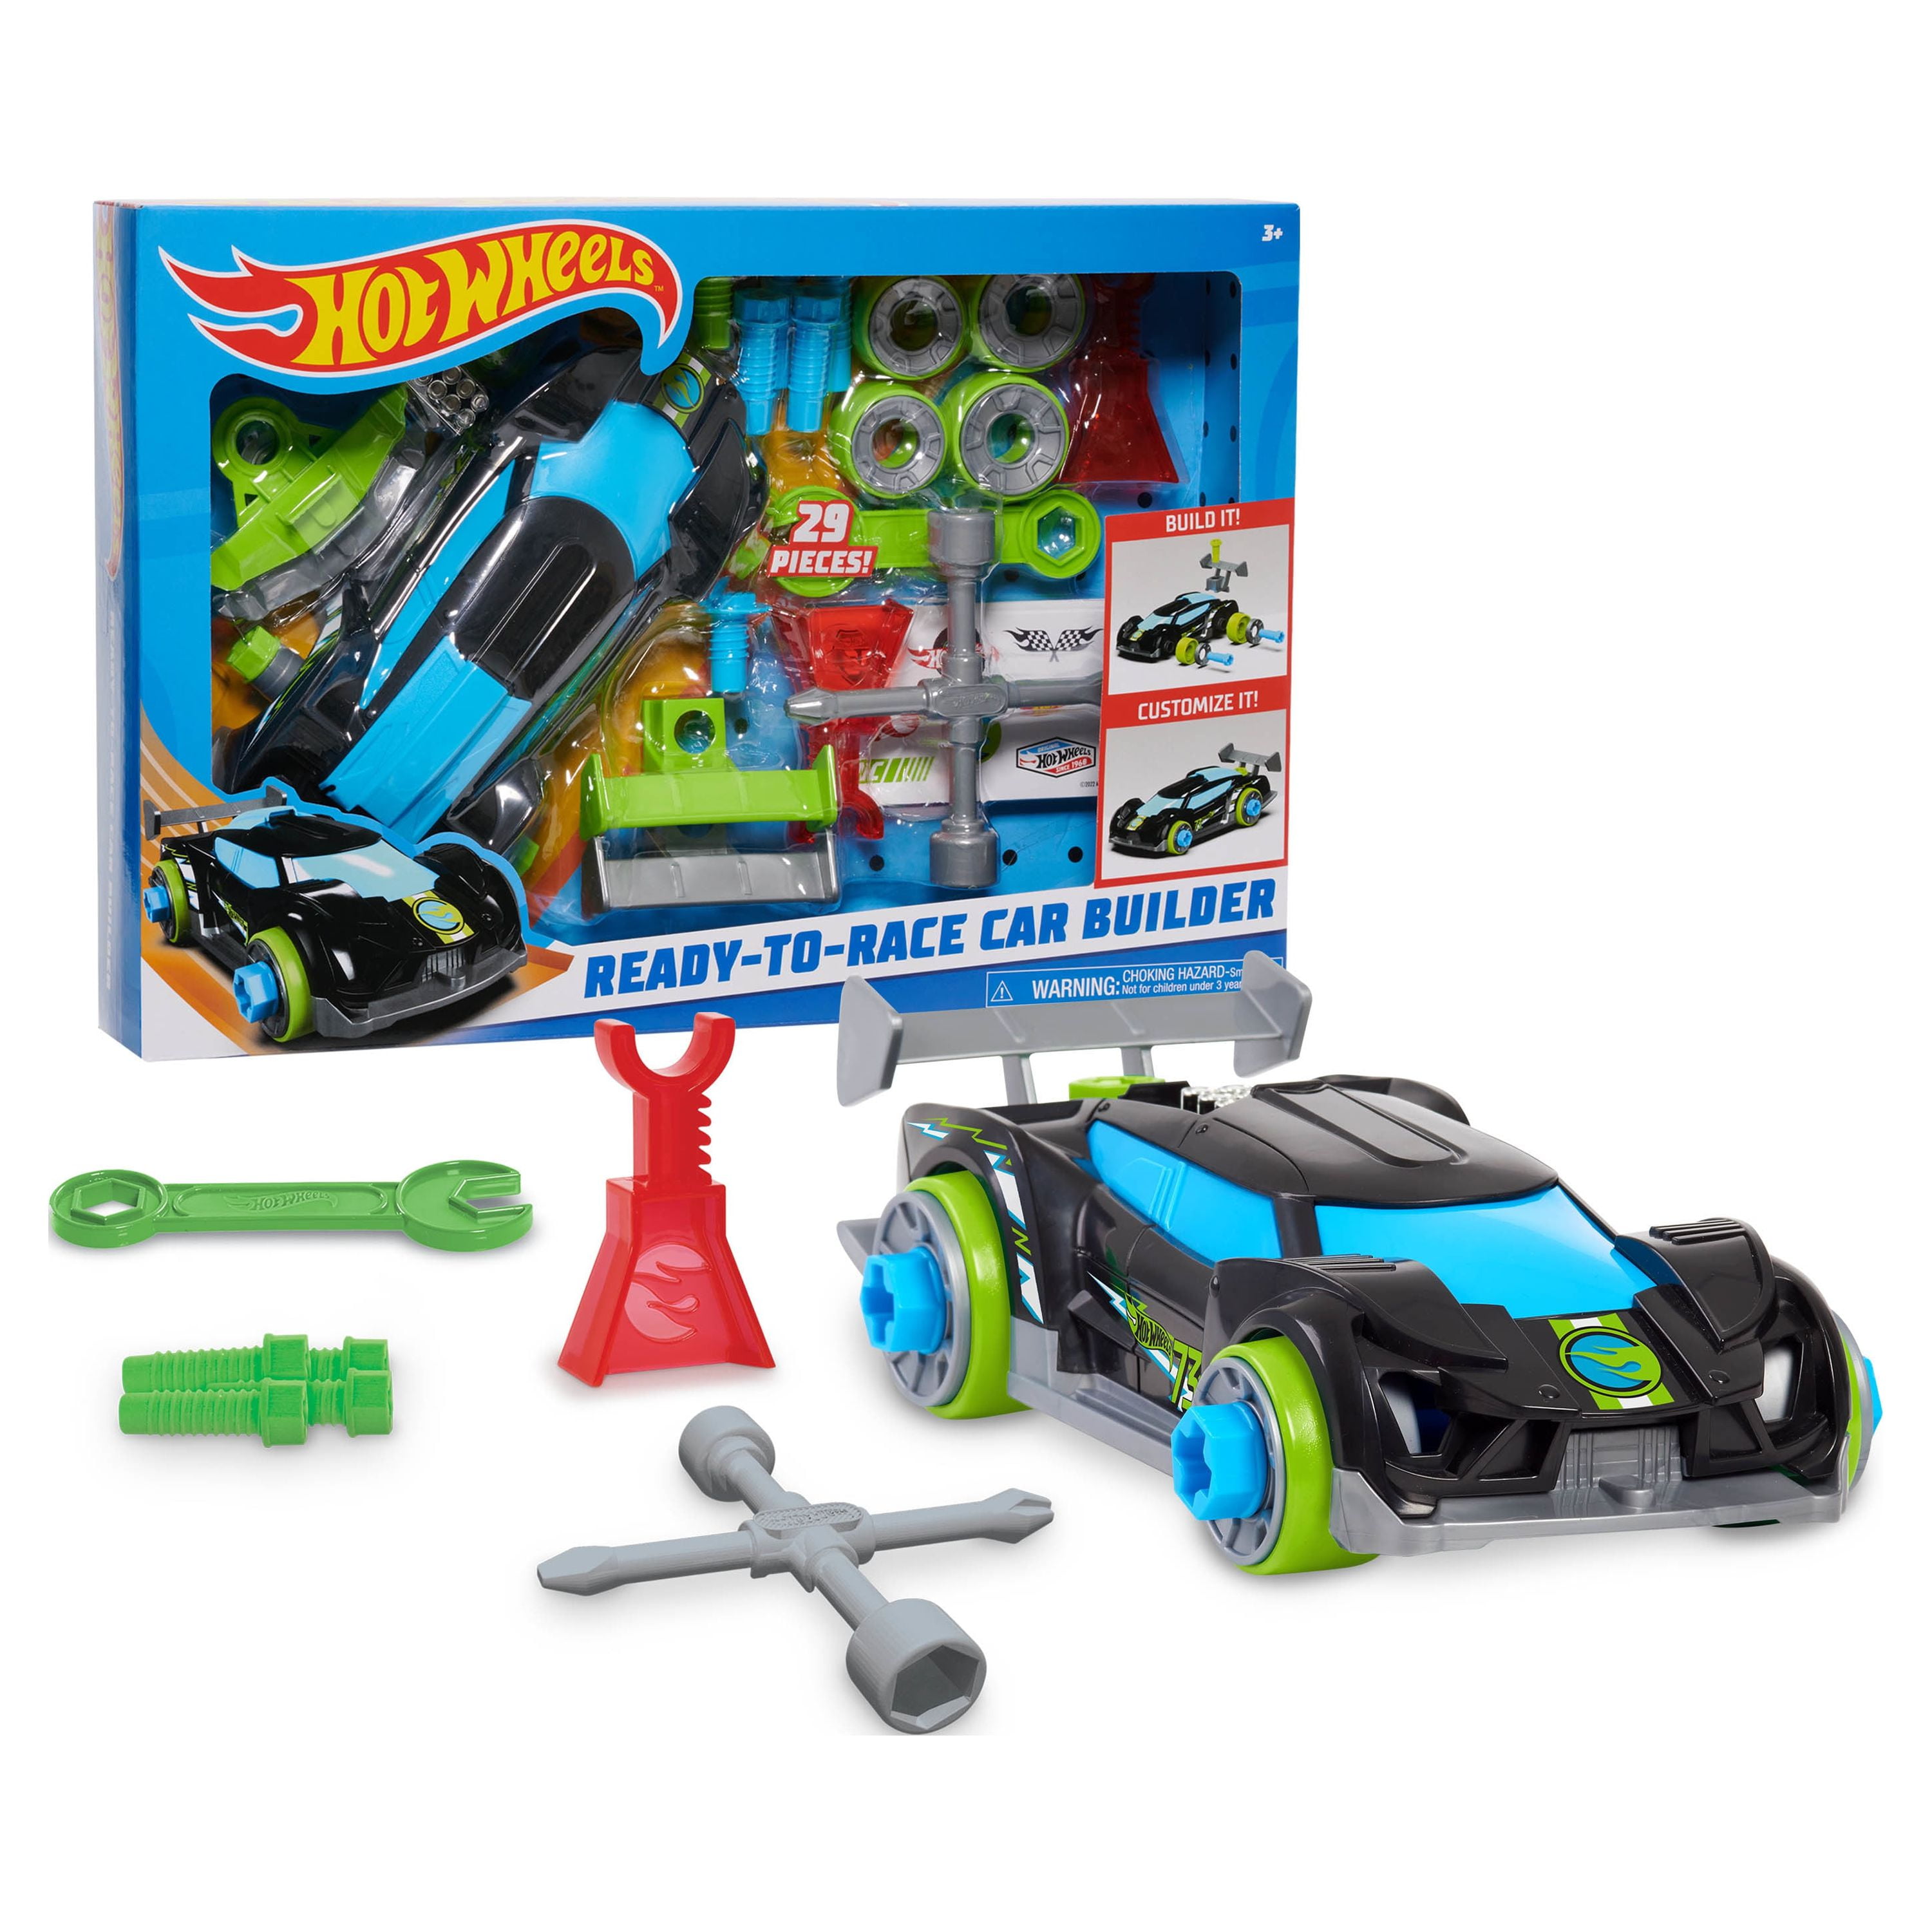 Hot Wheels Ready-To-Race Car Builder Set, Super Blitzen Vehicle, Kids Toys for Ages 3 Up, Size: 17.5 inches; 3.25 inches; 12.0 Inches